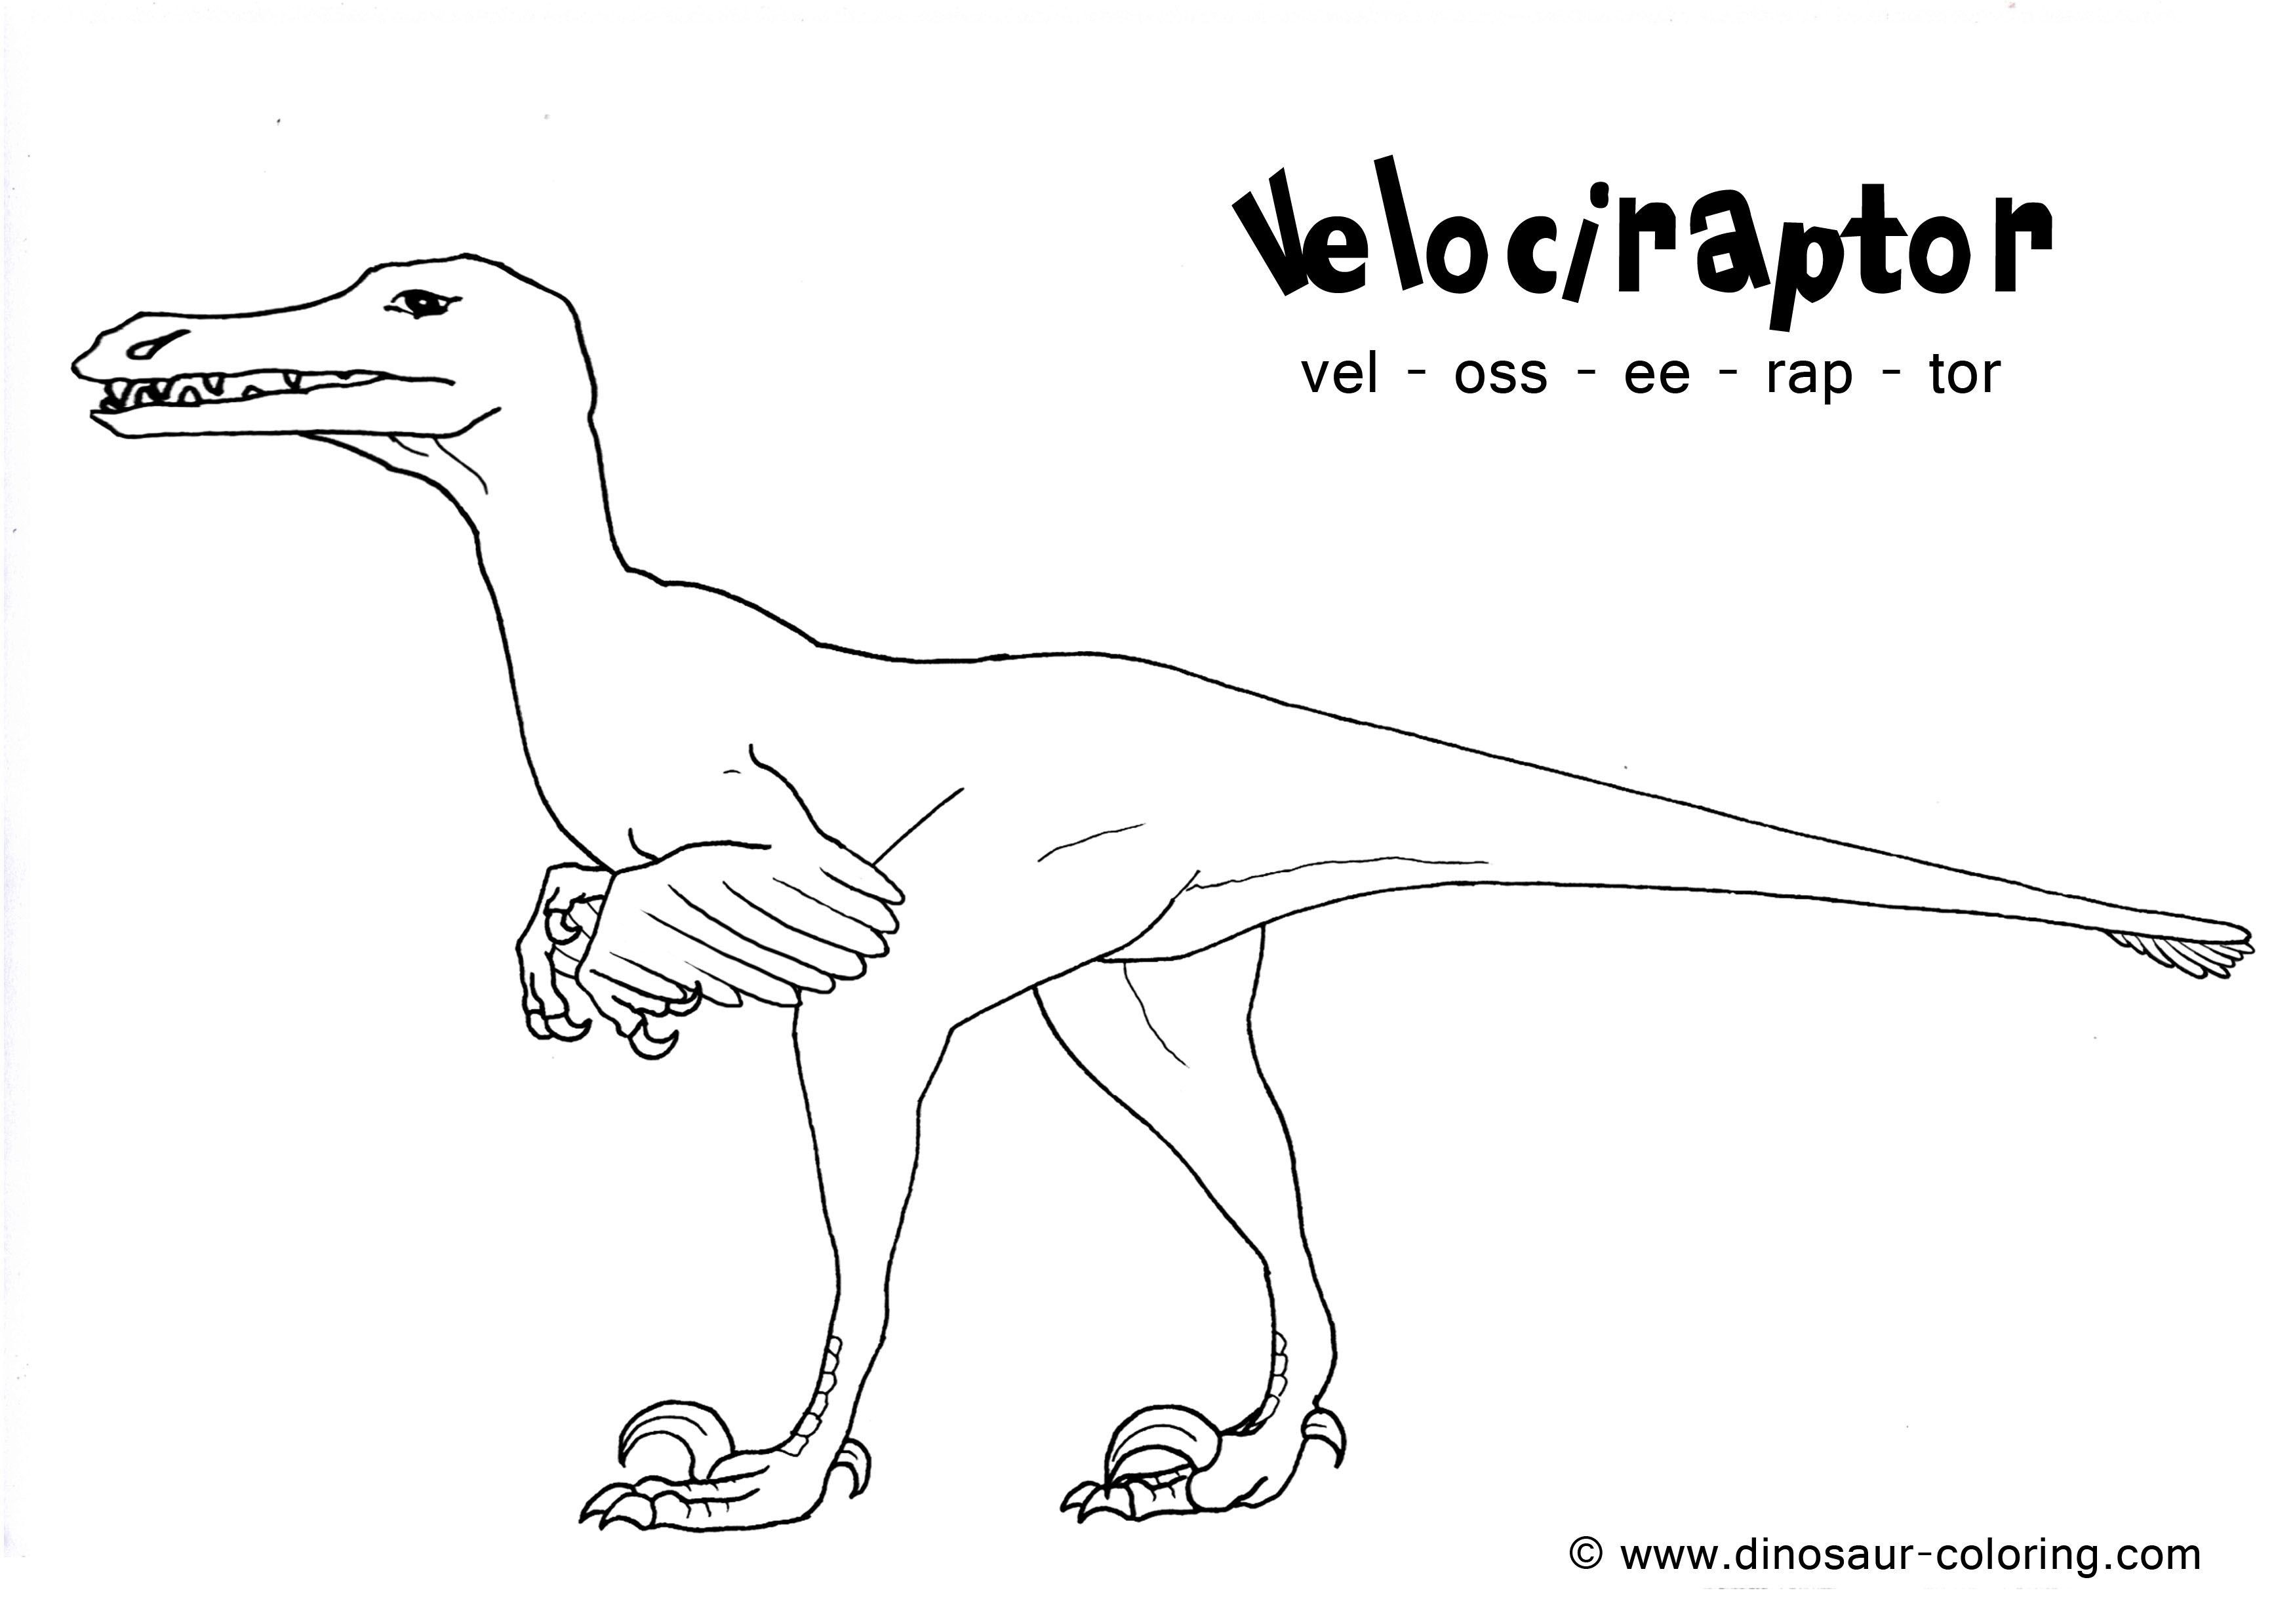 Dinosaur Coloring Pages Velociraptor